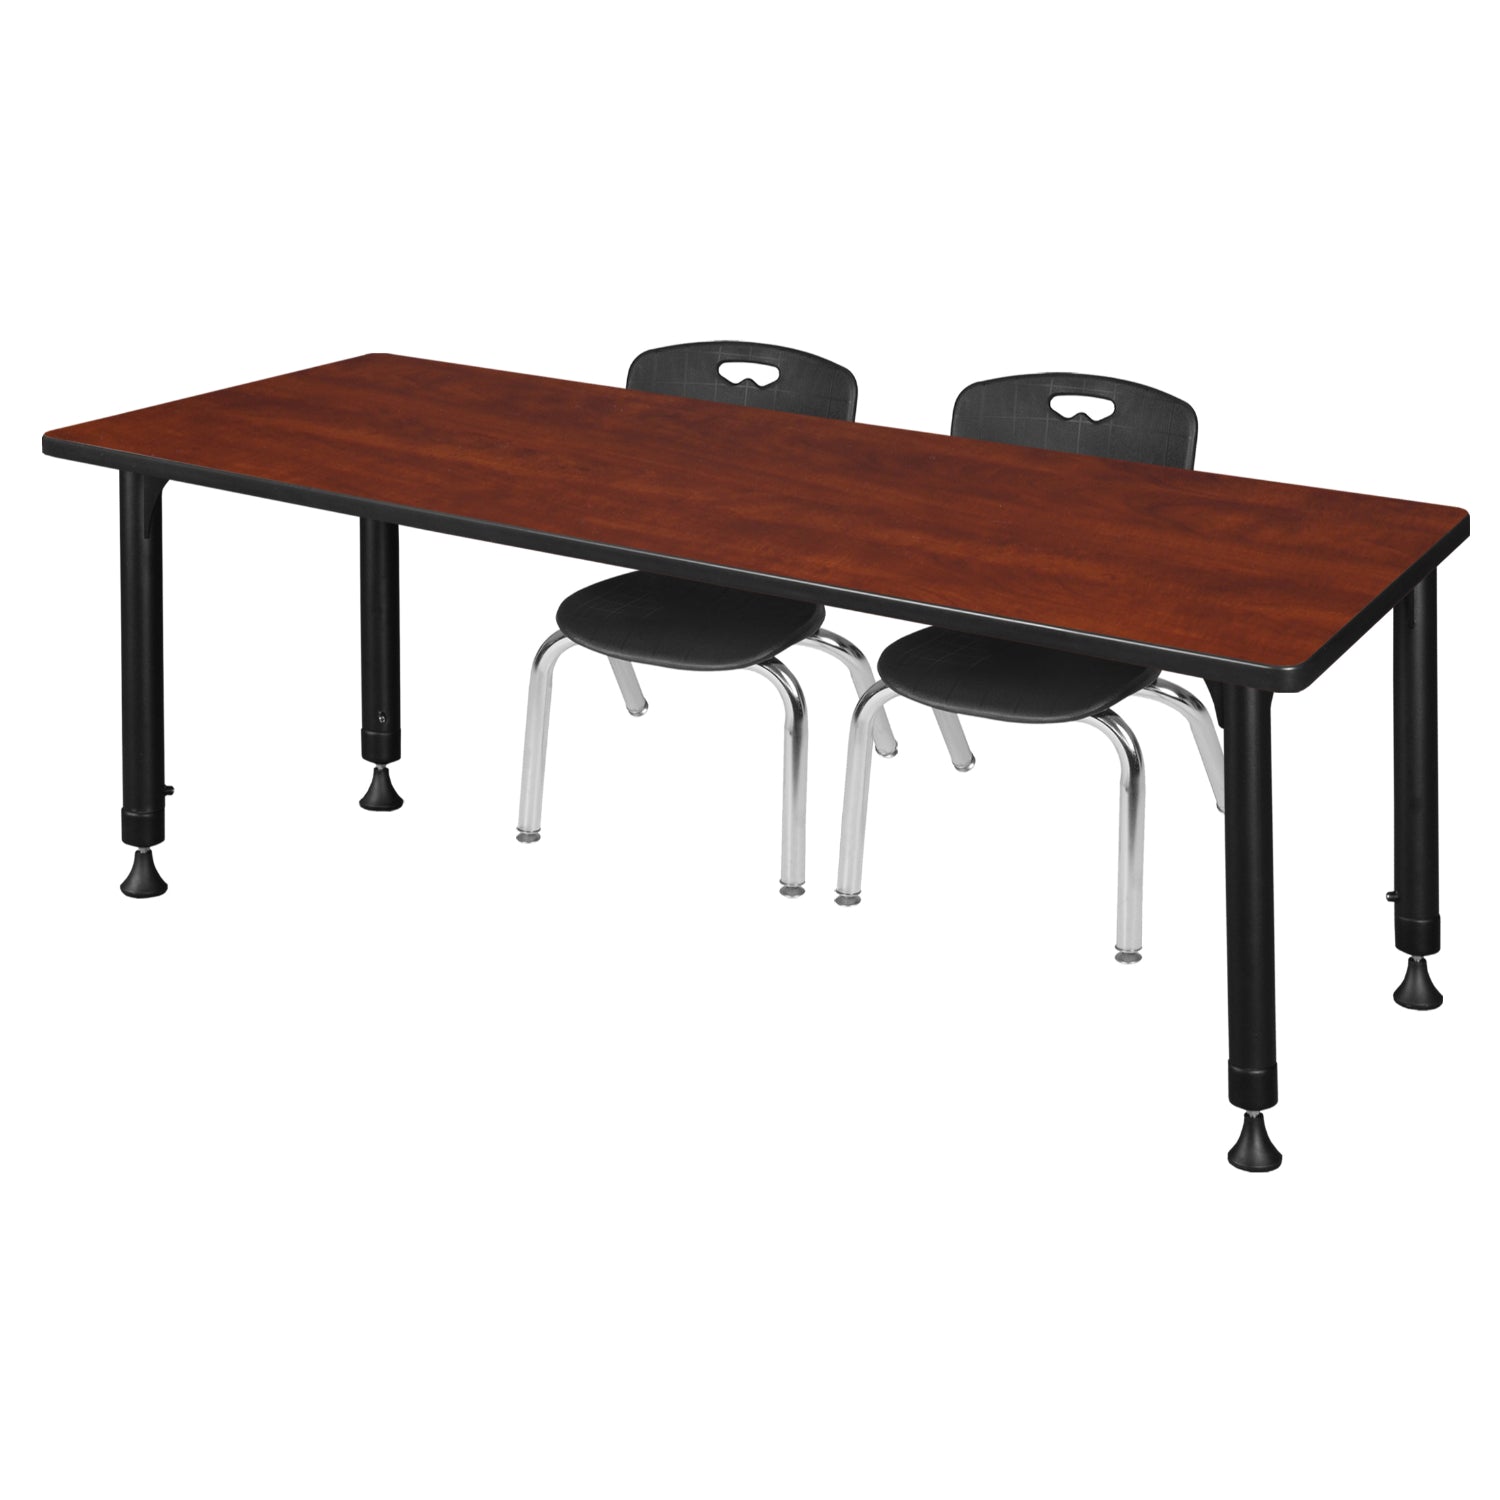 Kee Classroom Table and Chair Package, Kee 60" x 30" Rectangular Adjustable Height Table with 2 Andy 12" Stack Chairs